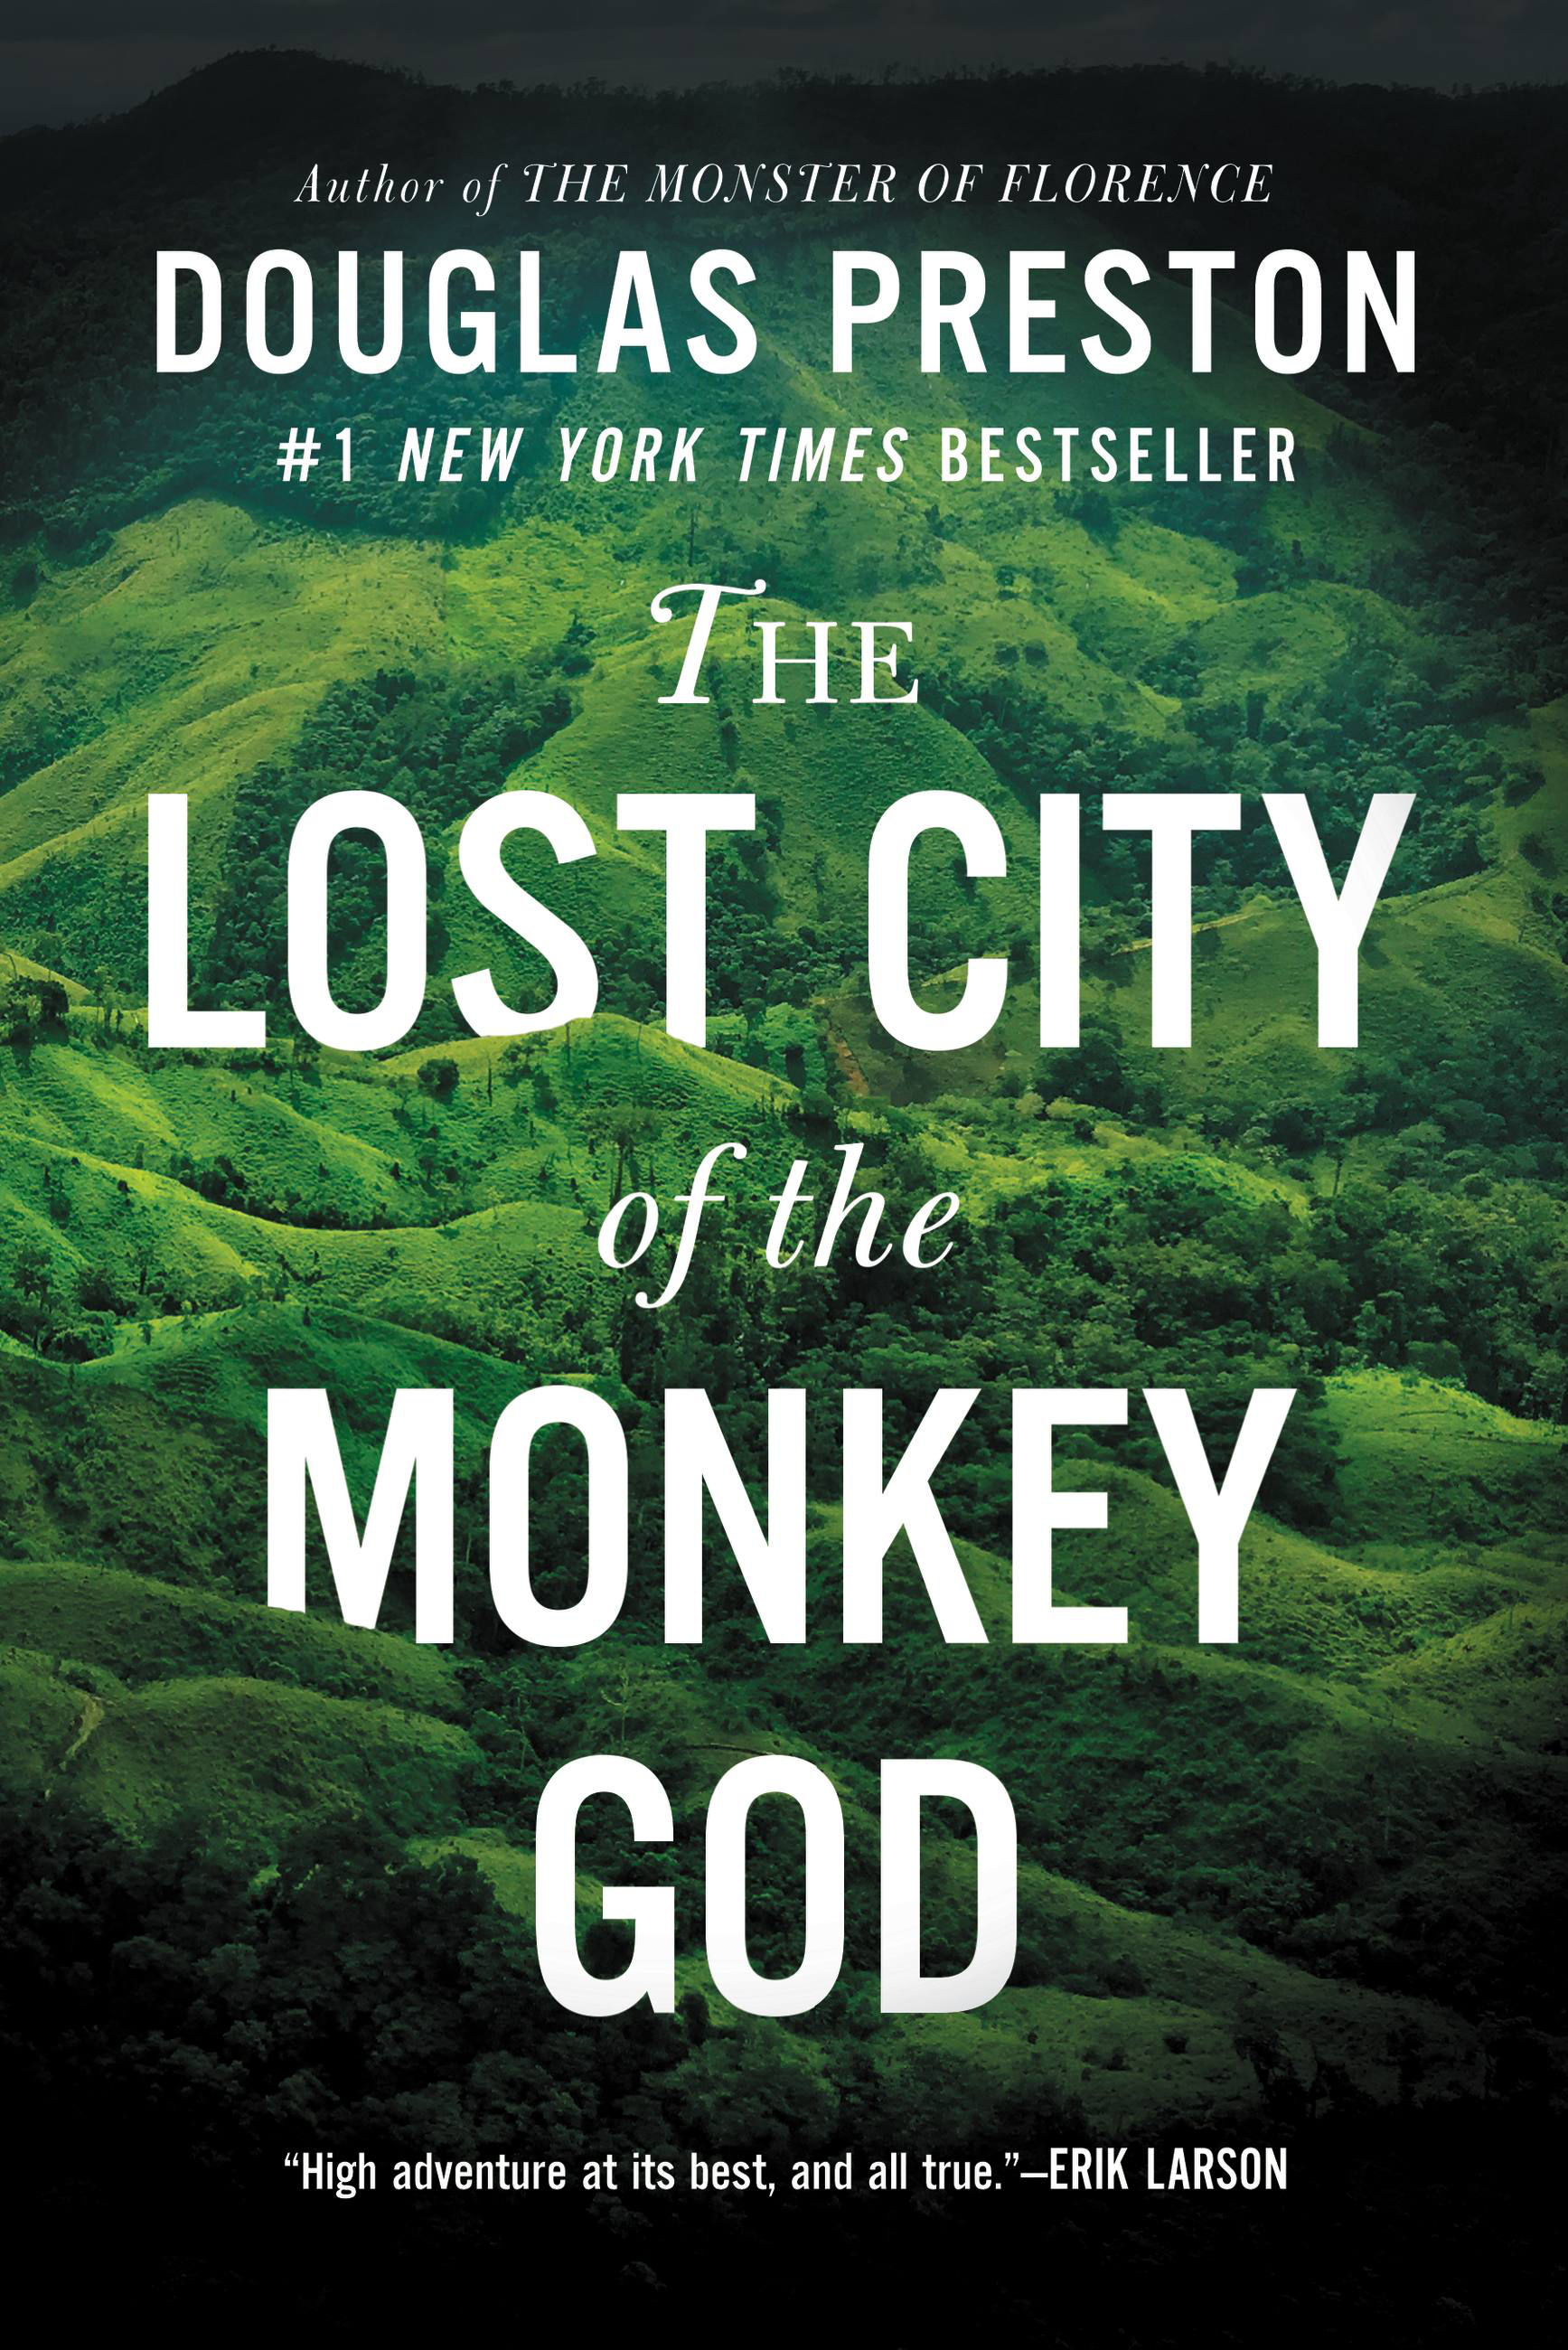 The Lost City of the Monkey God - BookMovement News